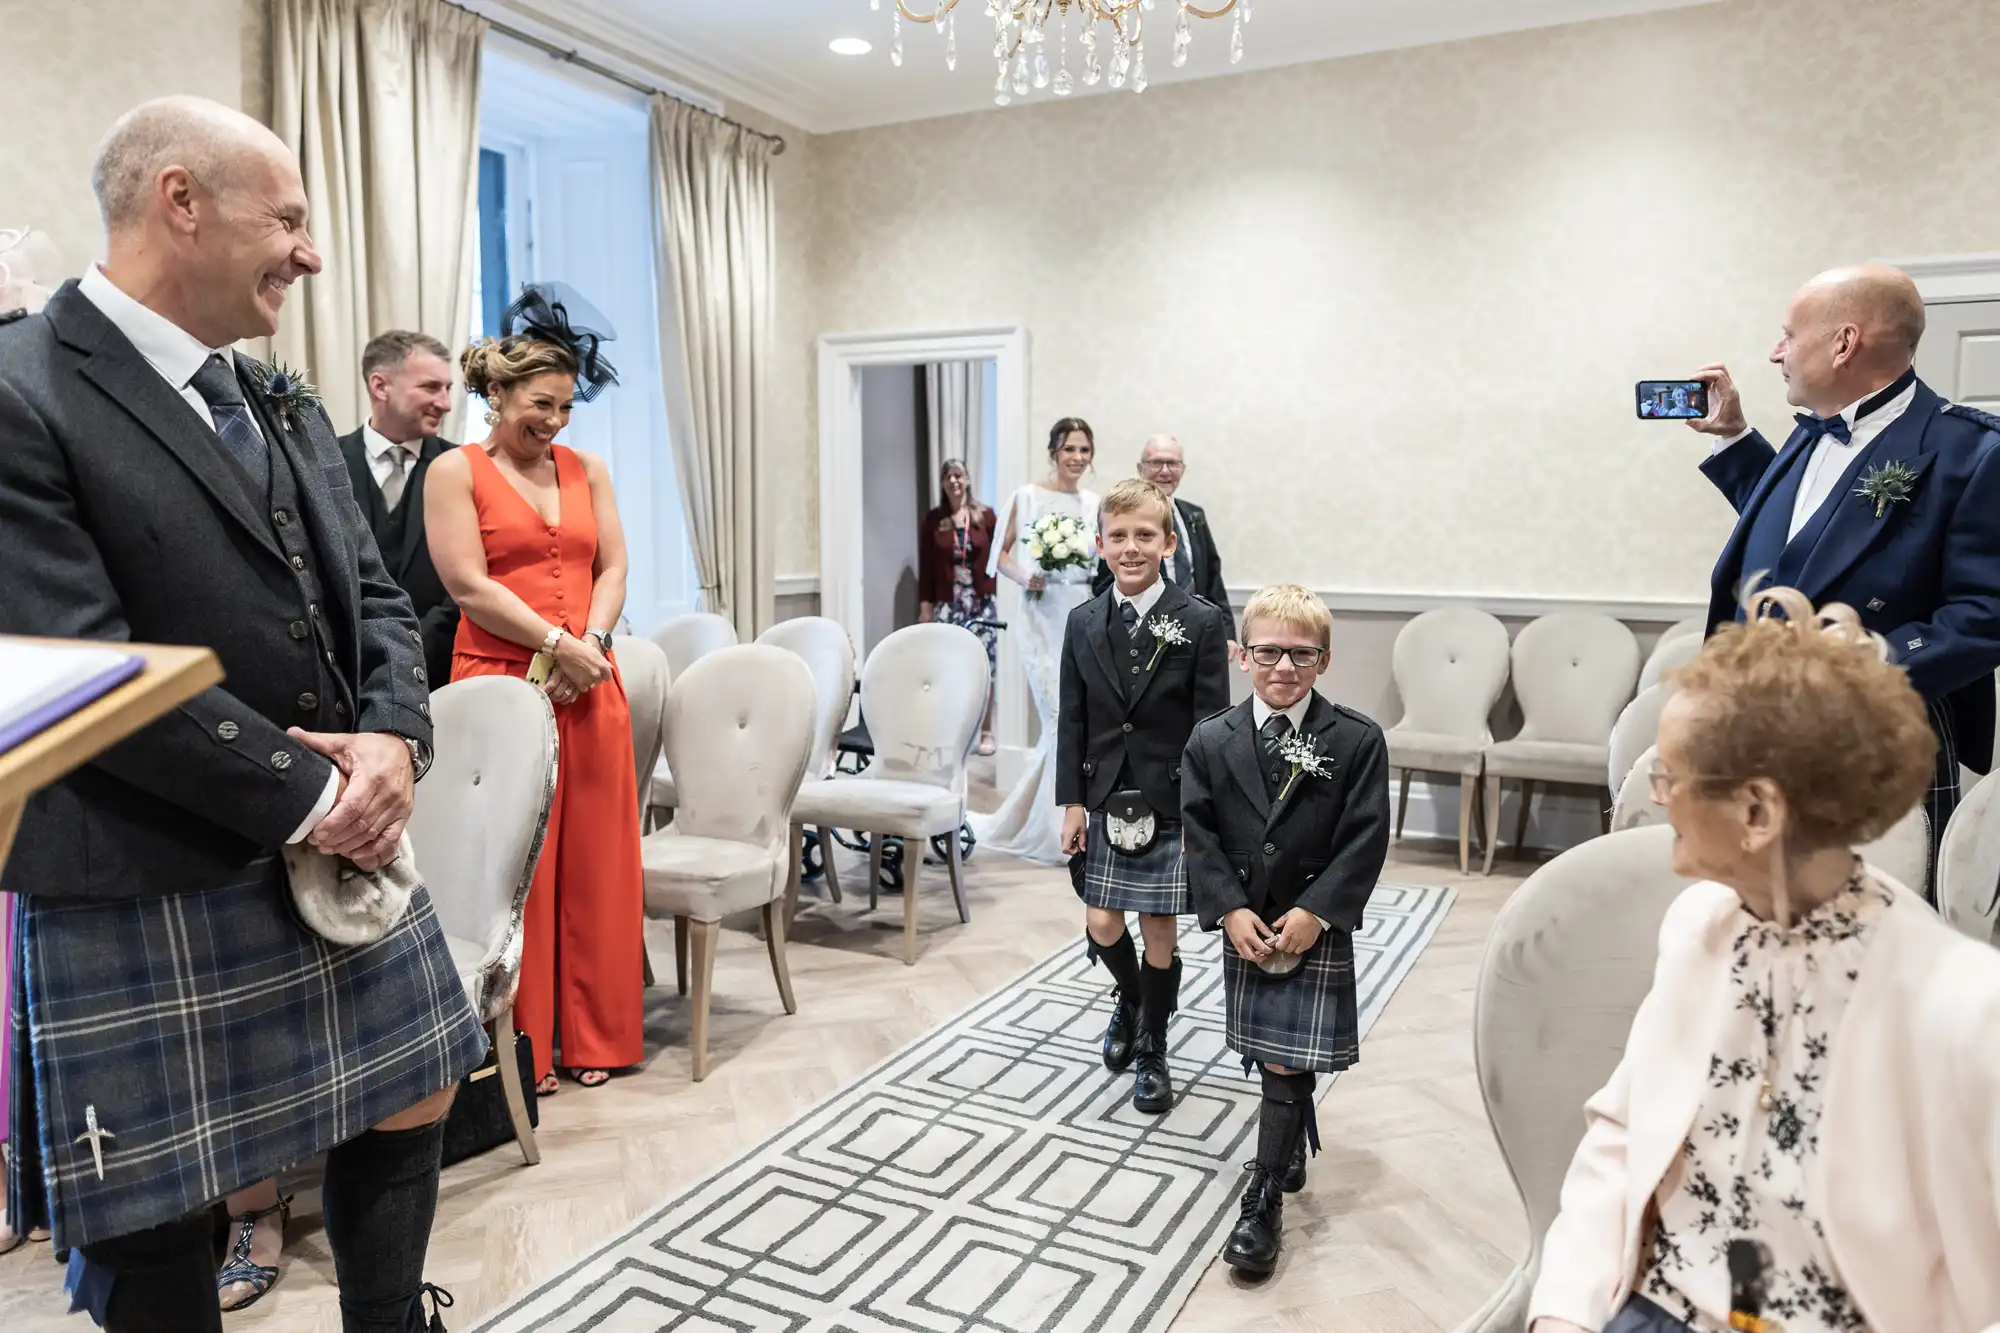 Two young boys in kilts walk down an aisle at a wedding ceremony. Guests, some in formal attire, smile and watch. One man captures the moment on his phone.